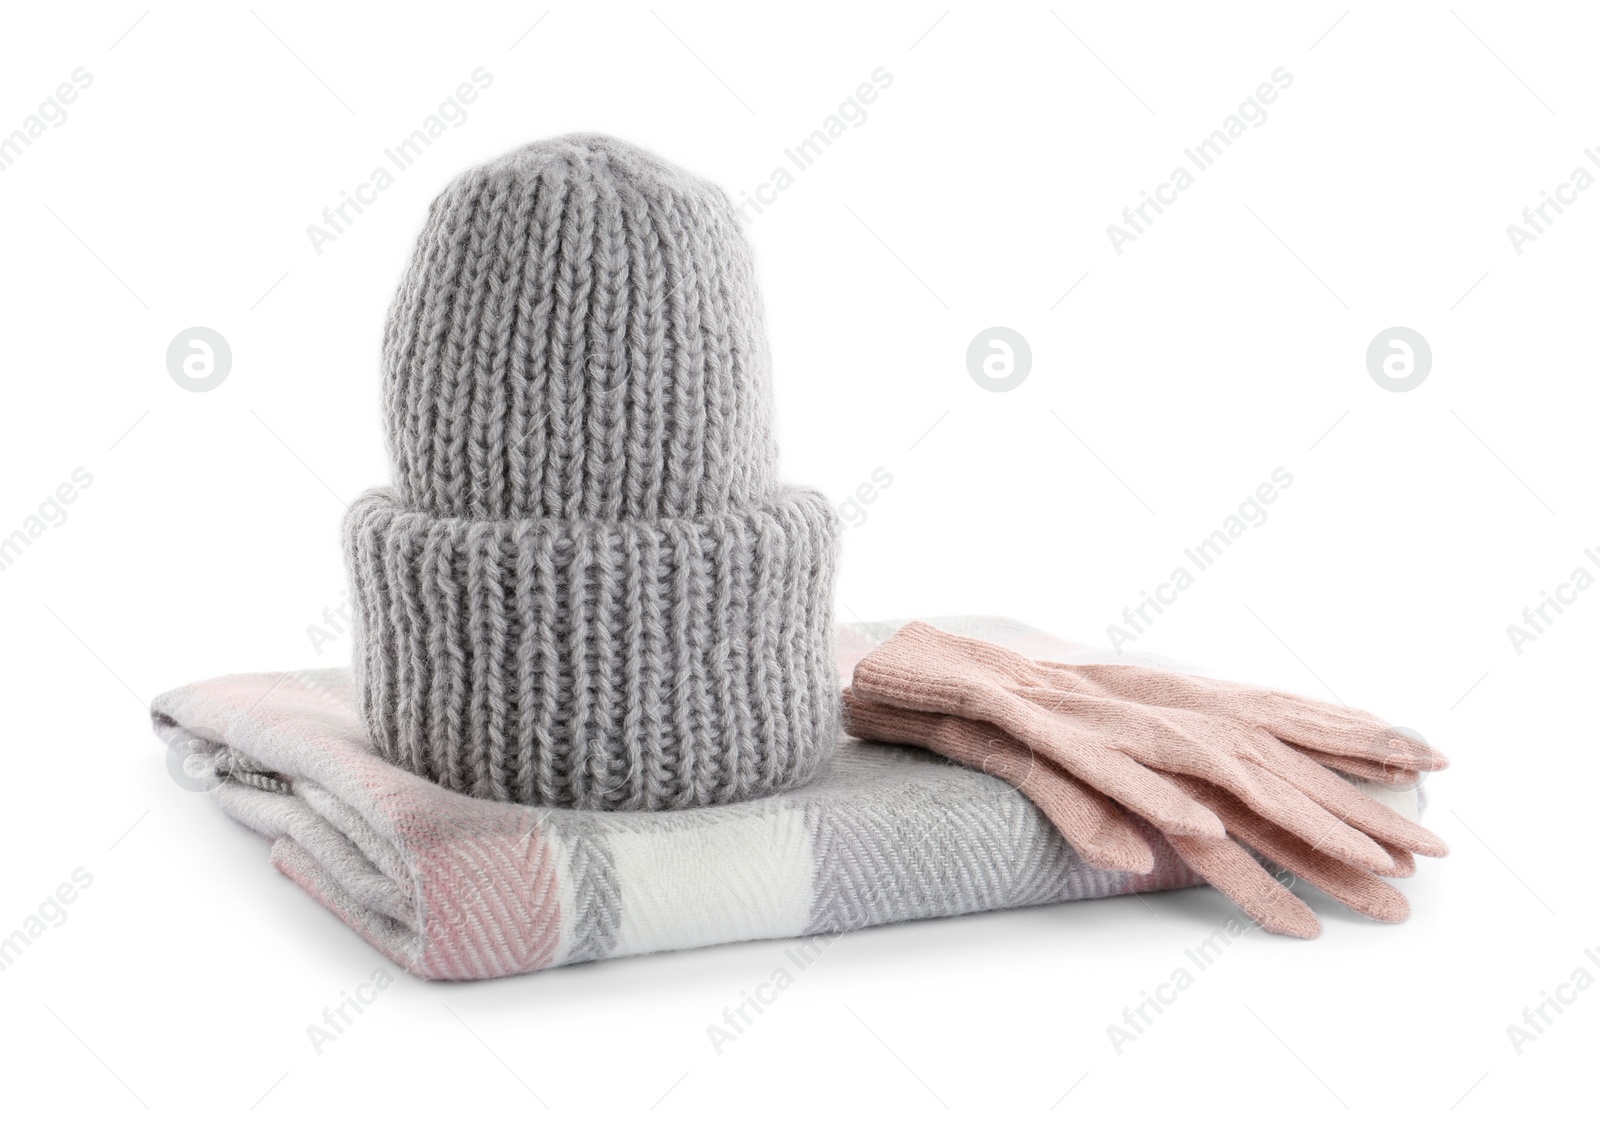 Photo of Woolen gloves, scarf and hat on white background